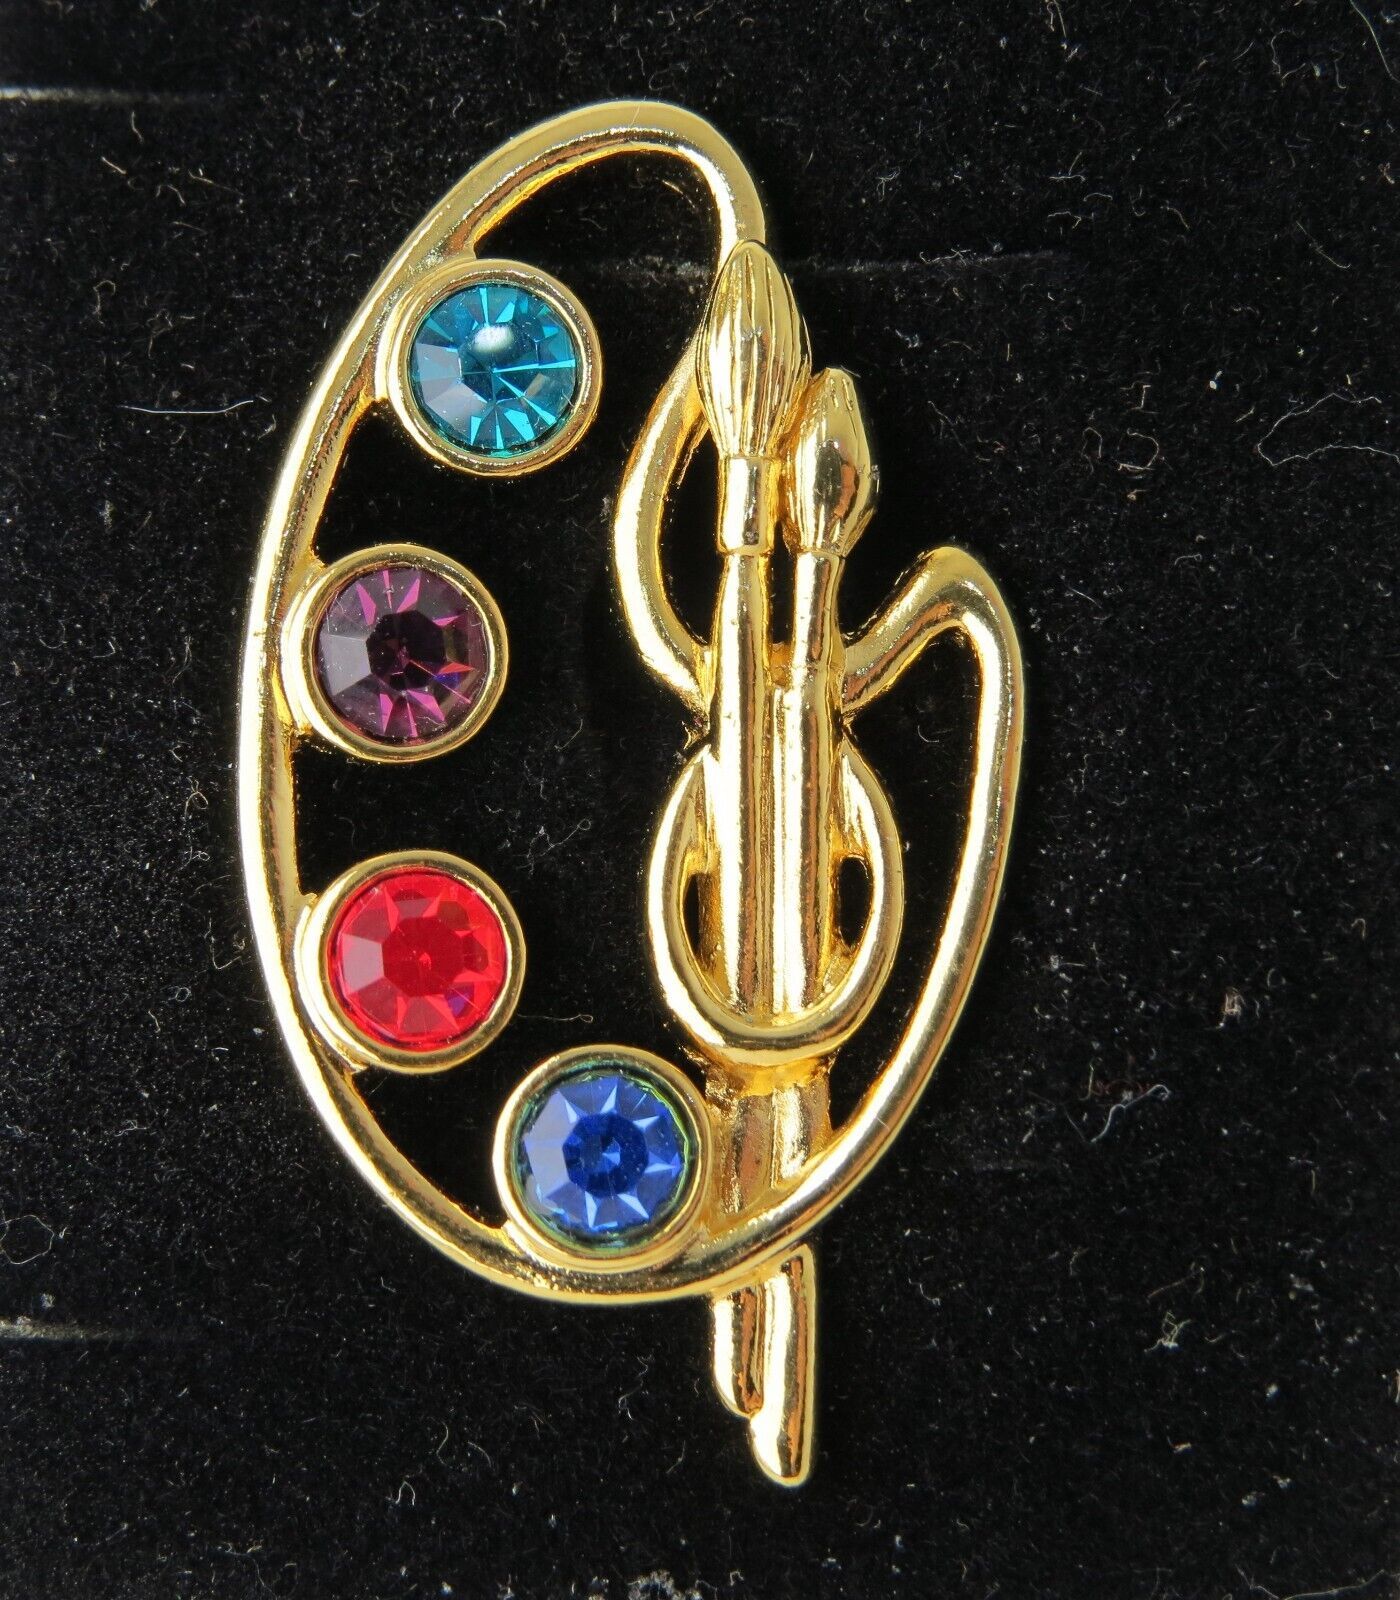 Primary image for Vintage Avon Painter's Palette Brooch Gold Tone Rhinestone Pin Artist 1 3/4"